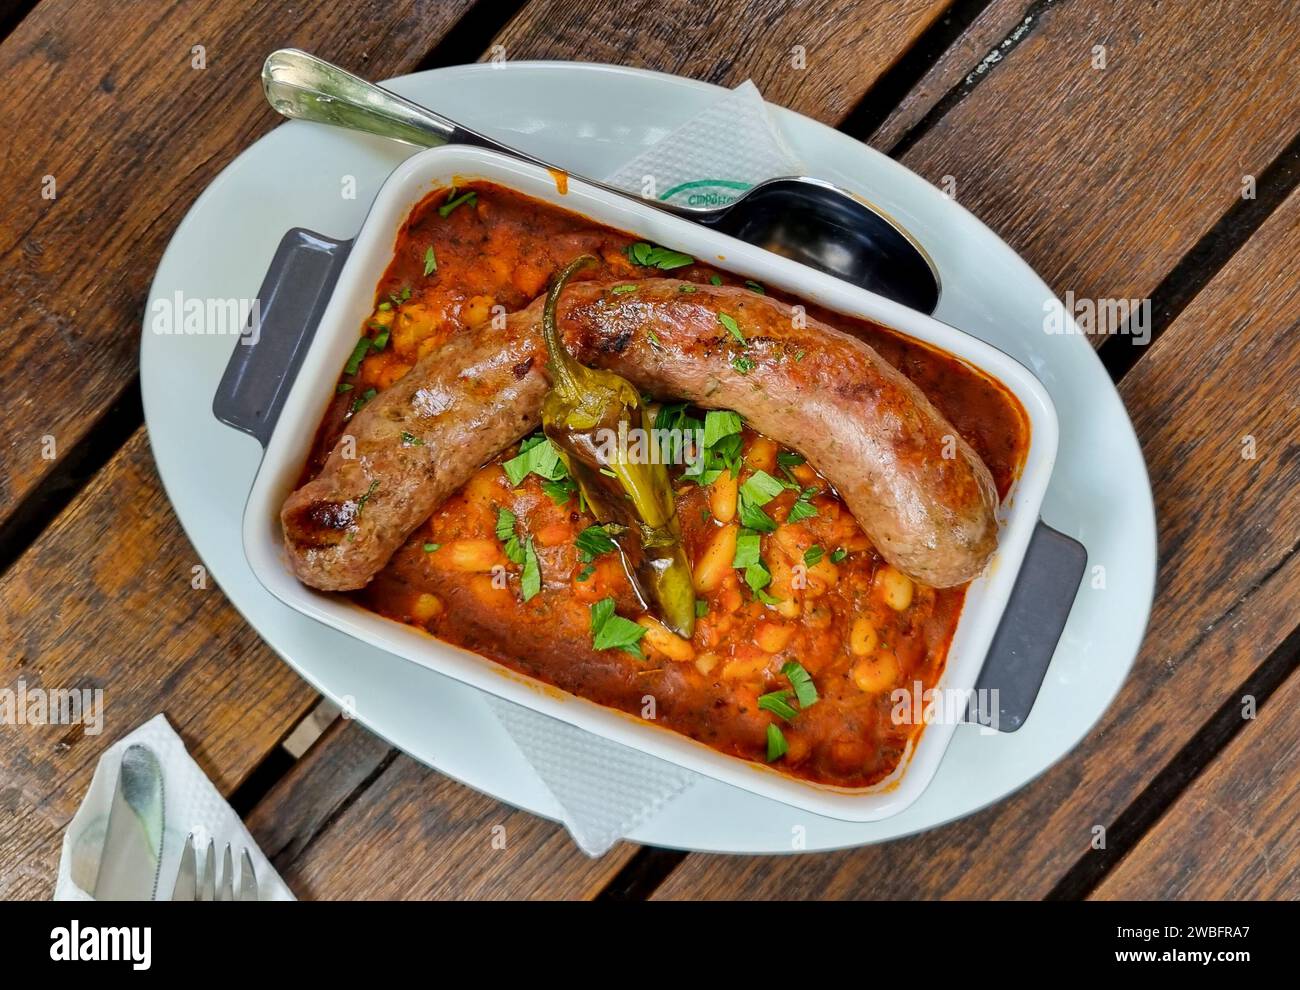 A plate of delicious smoked sausage links, cooked to perfection and ready to be enjoyed, sits on a table Stock Photo